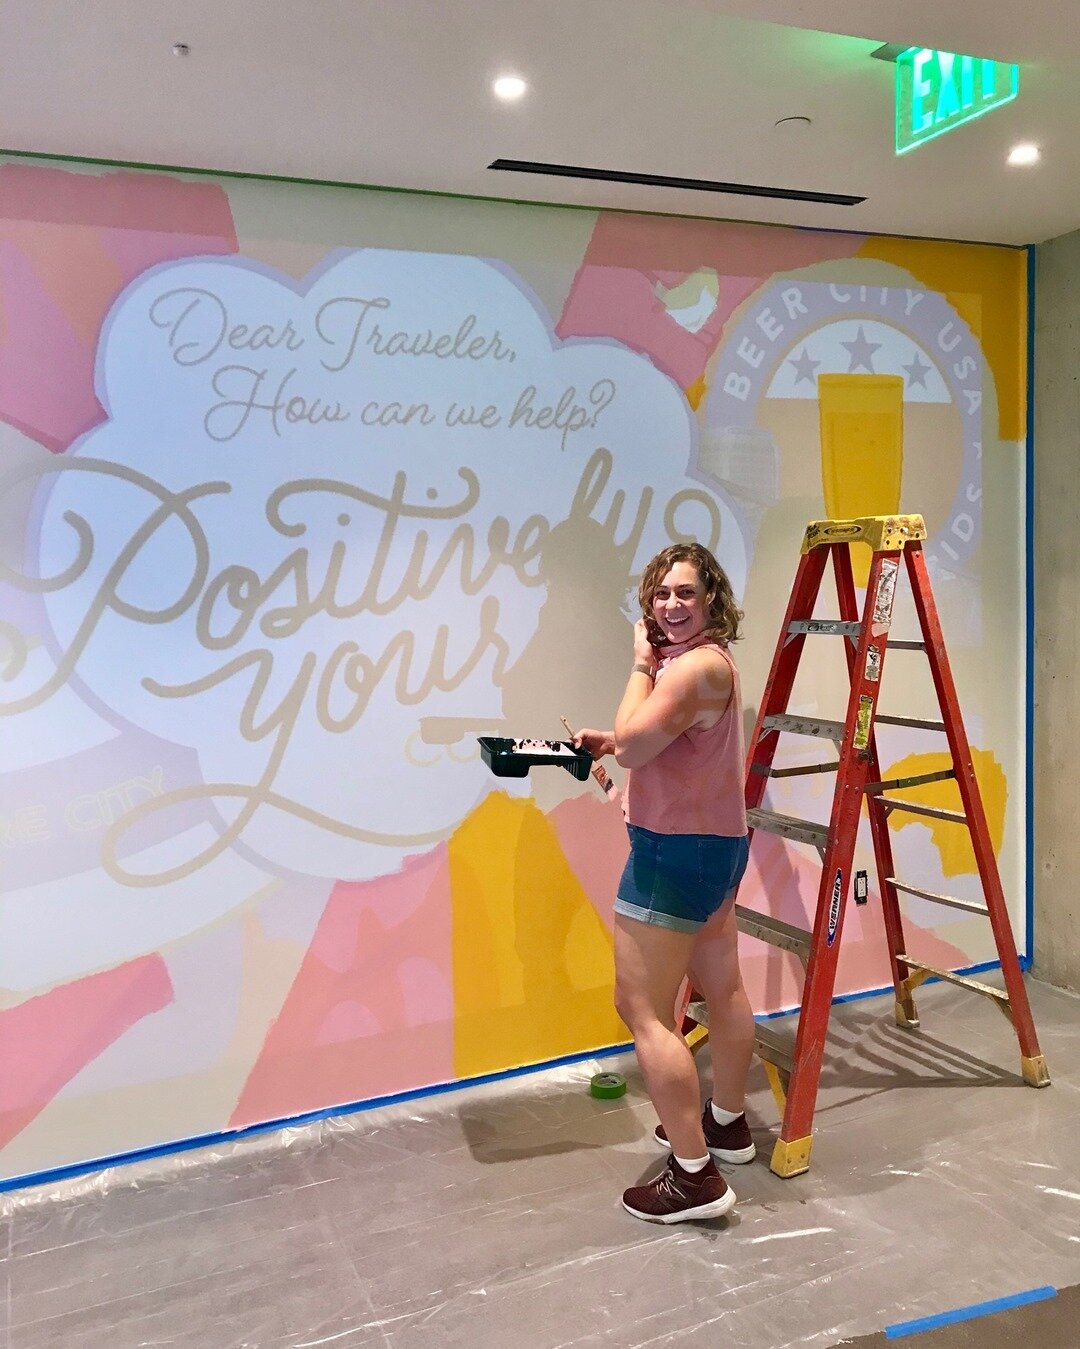 In progress @canopygrandrapids -- and yes, this was from a few months ago when it was WARM. Not quite ready for the cold, but here we go Chicago. #chicagomurals #chicagoartist #muralartists #ladieswhopaint #muralsofinstagram